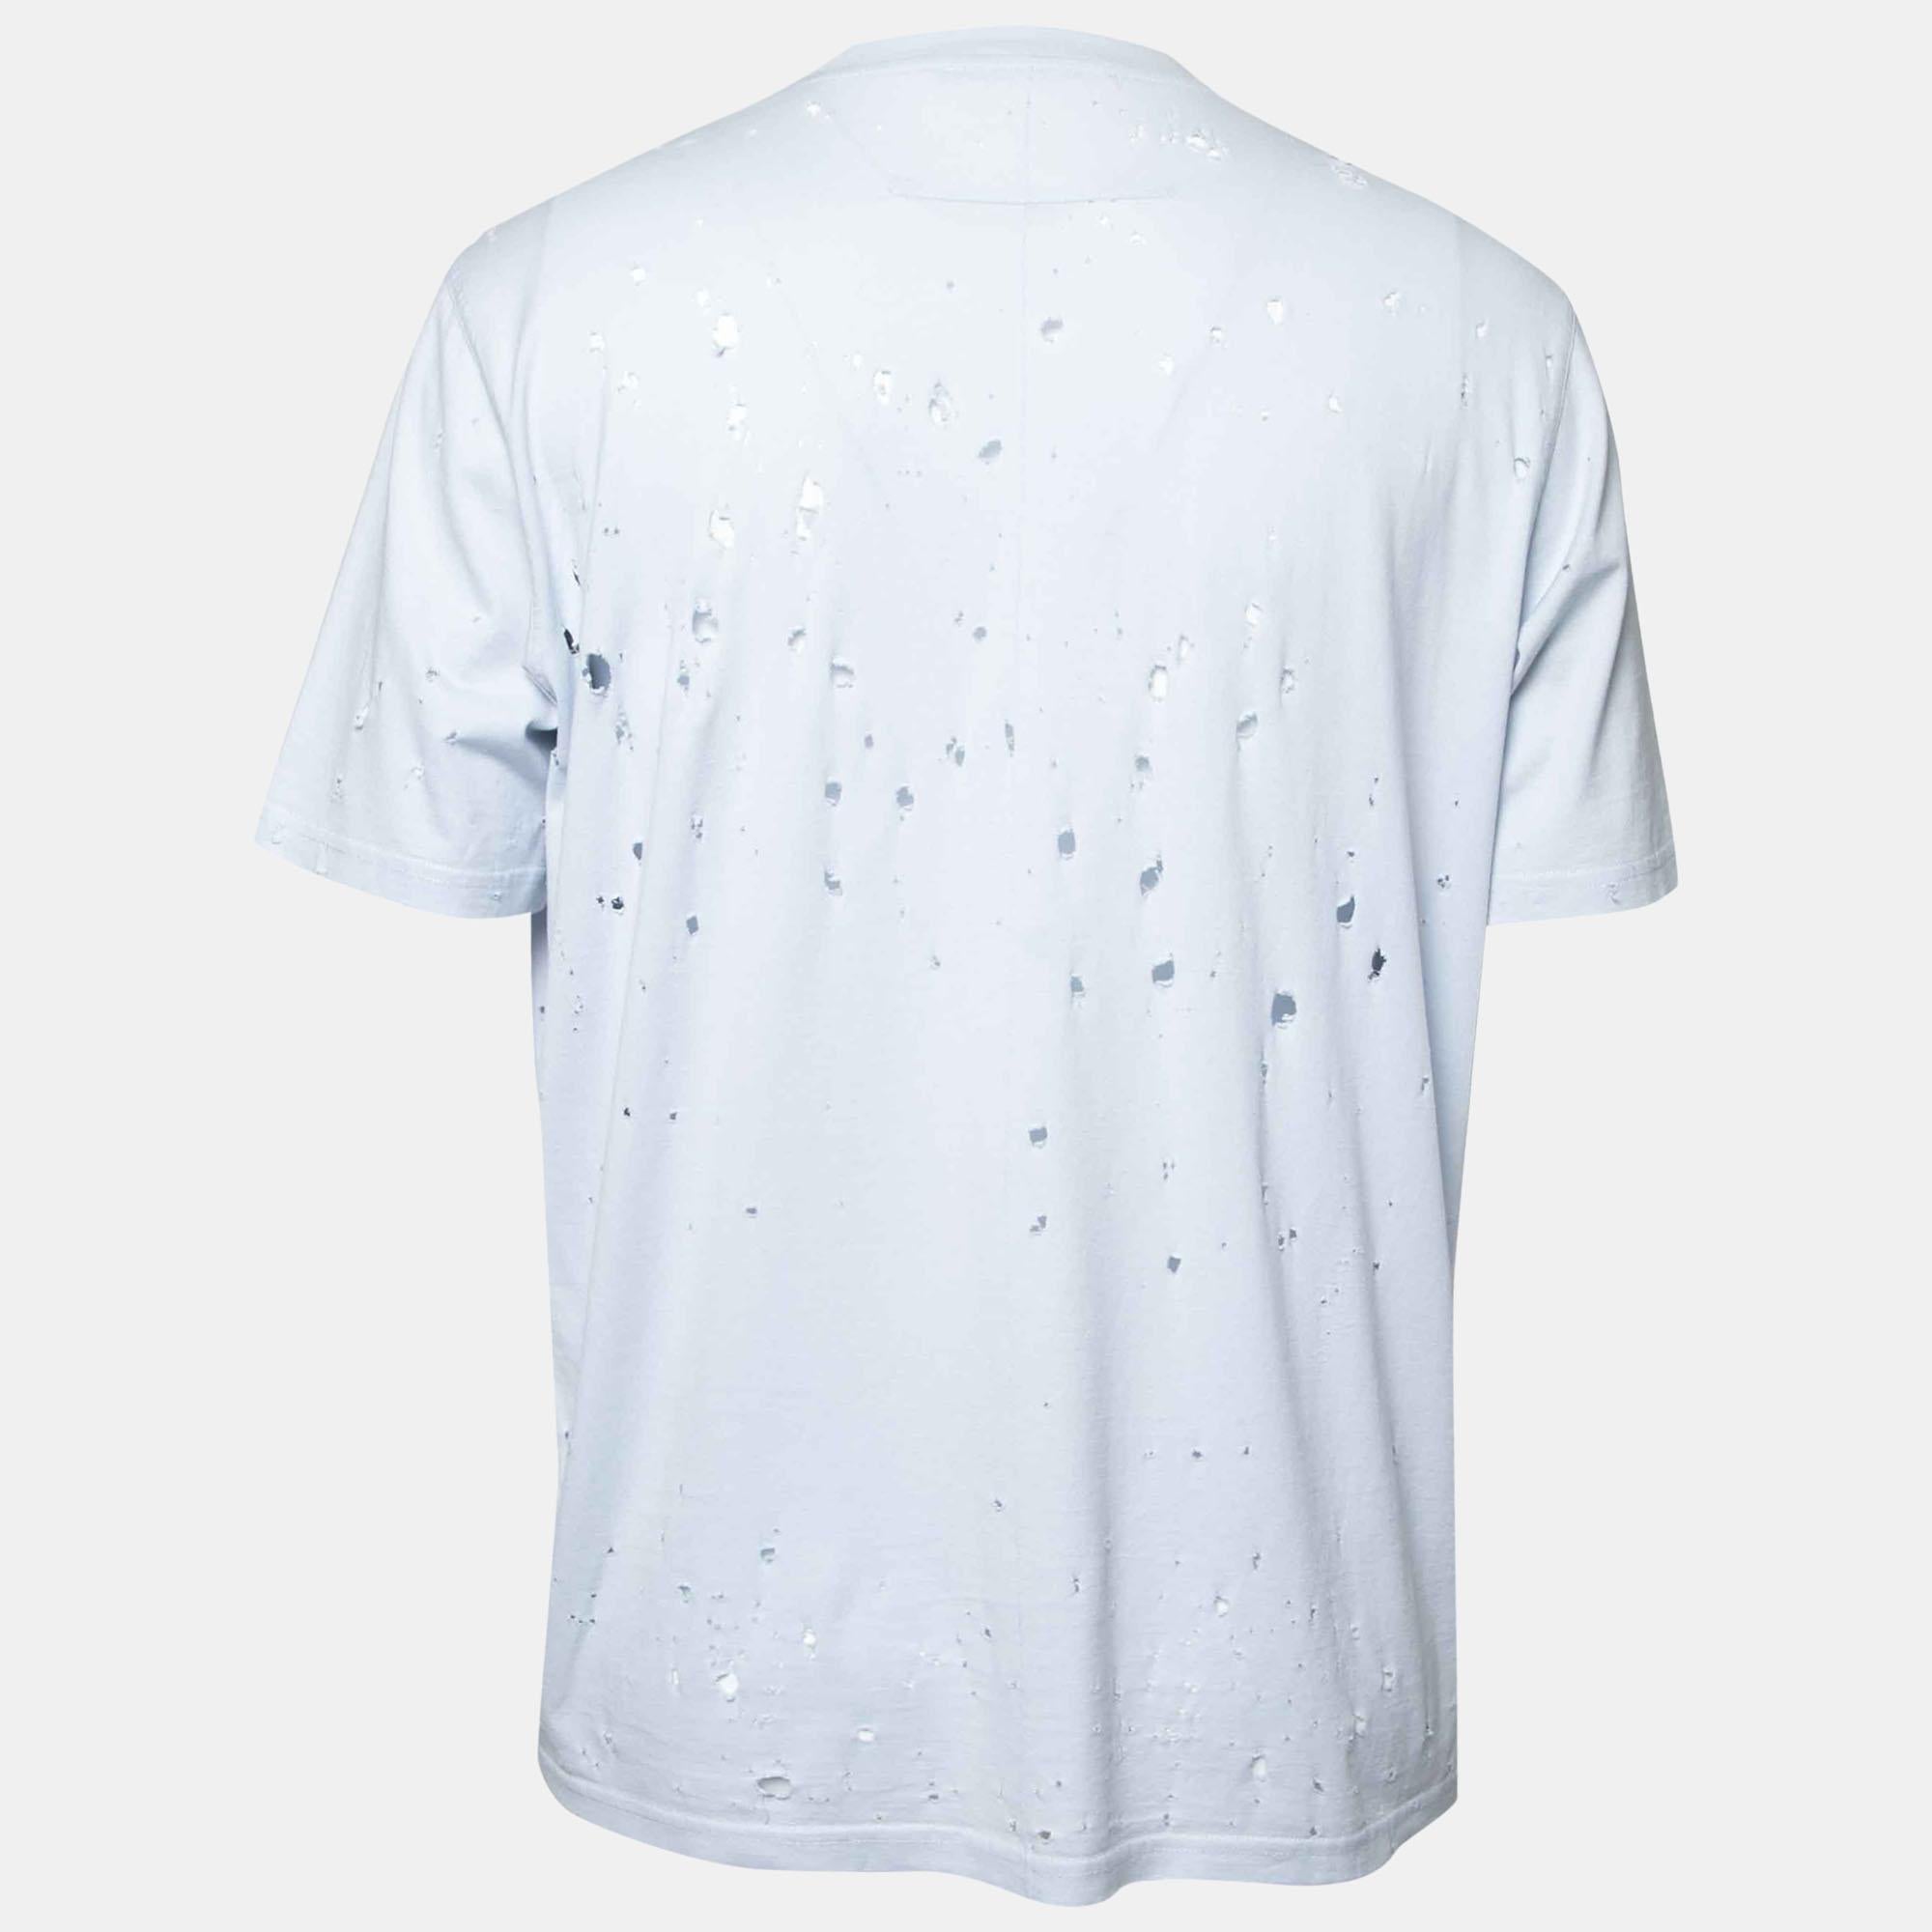 Givenchy brings you a simple t-shirt elevated by the label's logo and a distressed finish all over. It has been tailored from cotton in a light blue shade and features short sleeves. Style the creation with sneakers and denim pants for a cool and